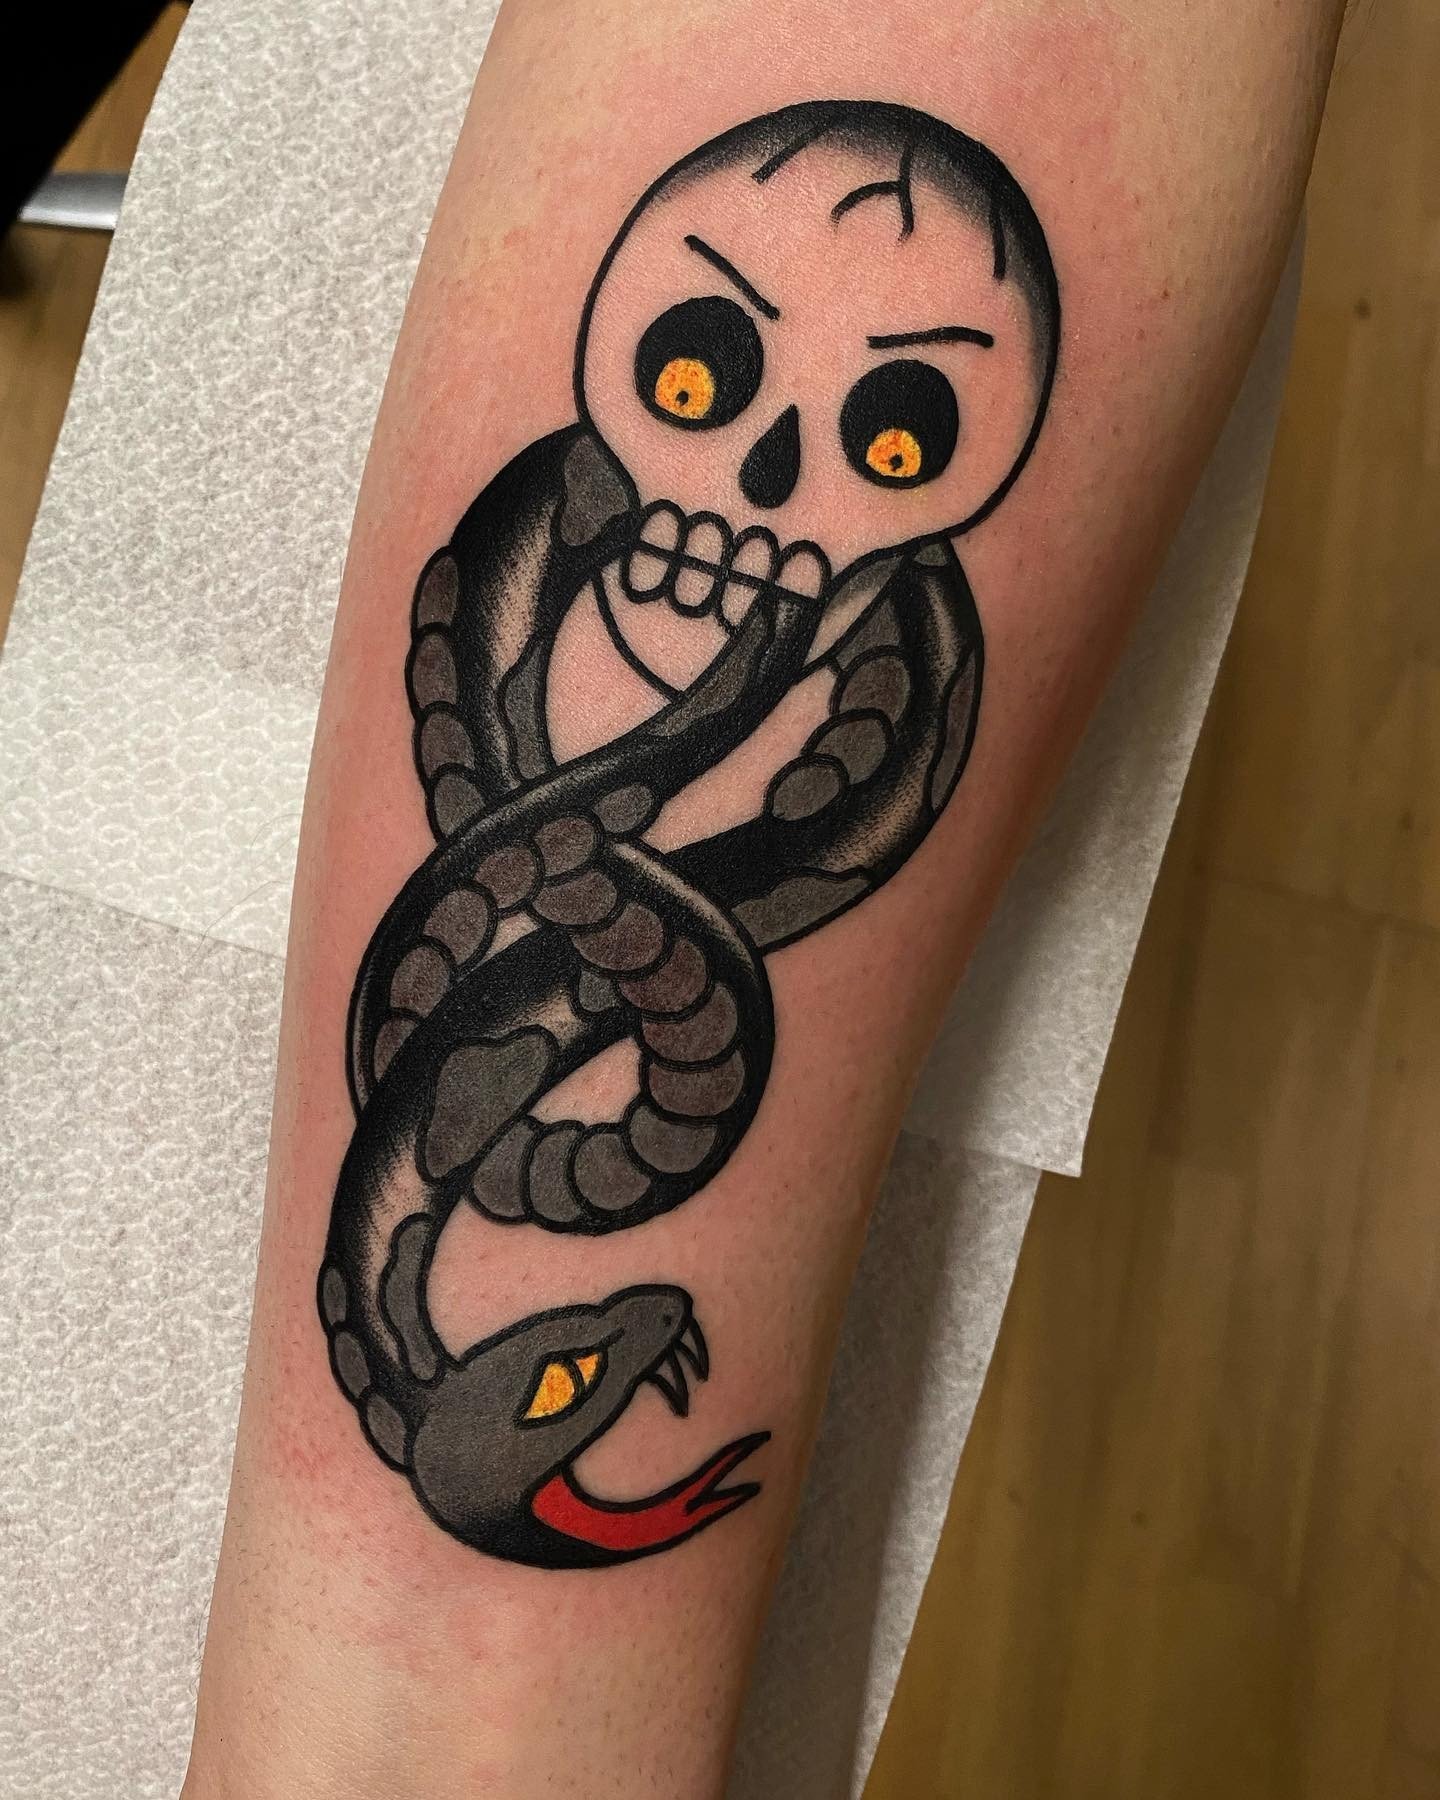 This is a very cool tattoo for someone who likes the Harry Potter series and wants to get a scary tattoo. The yellow eyes are a nice touch.